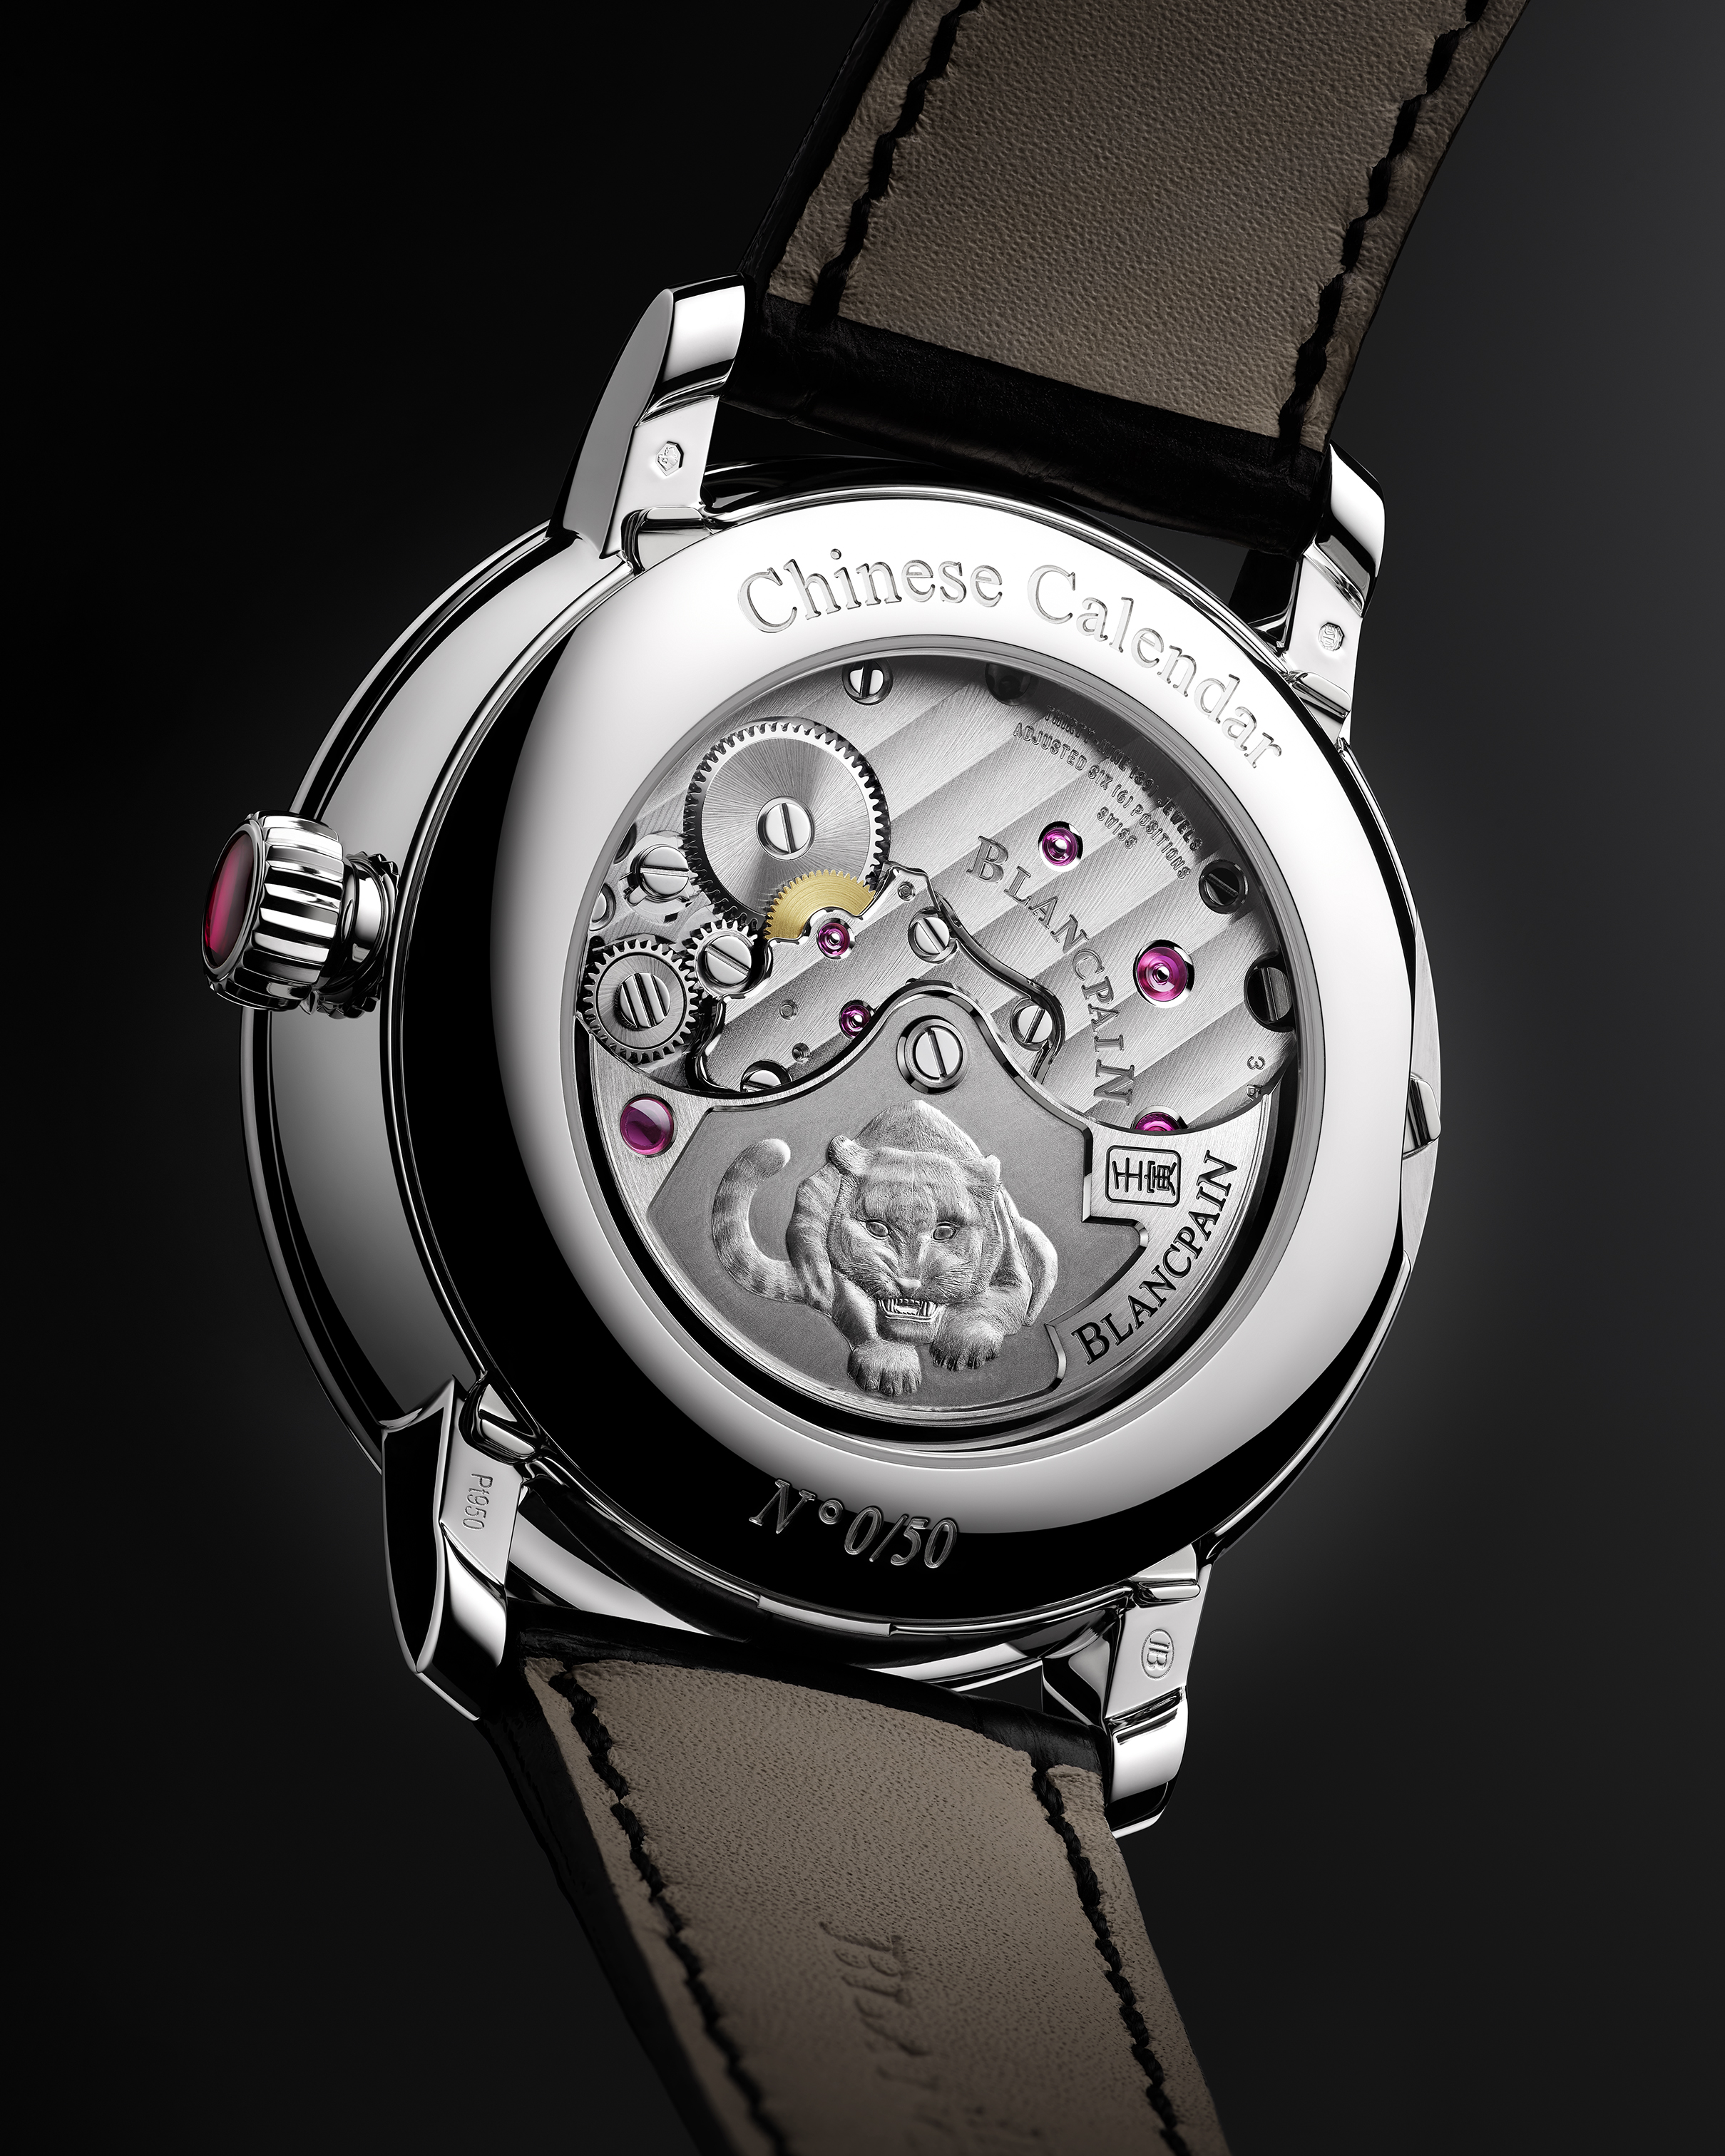 Blancpain Villeret Calendrier Chinois Traditionnel